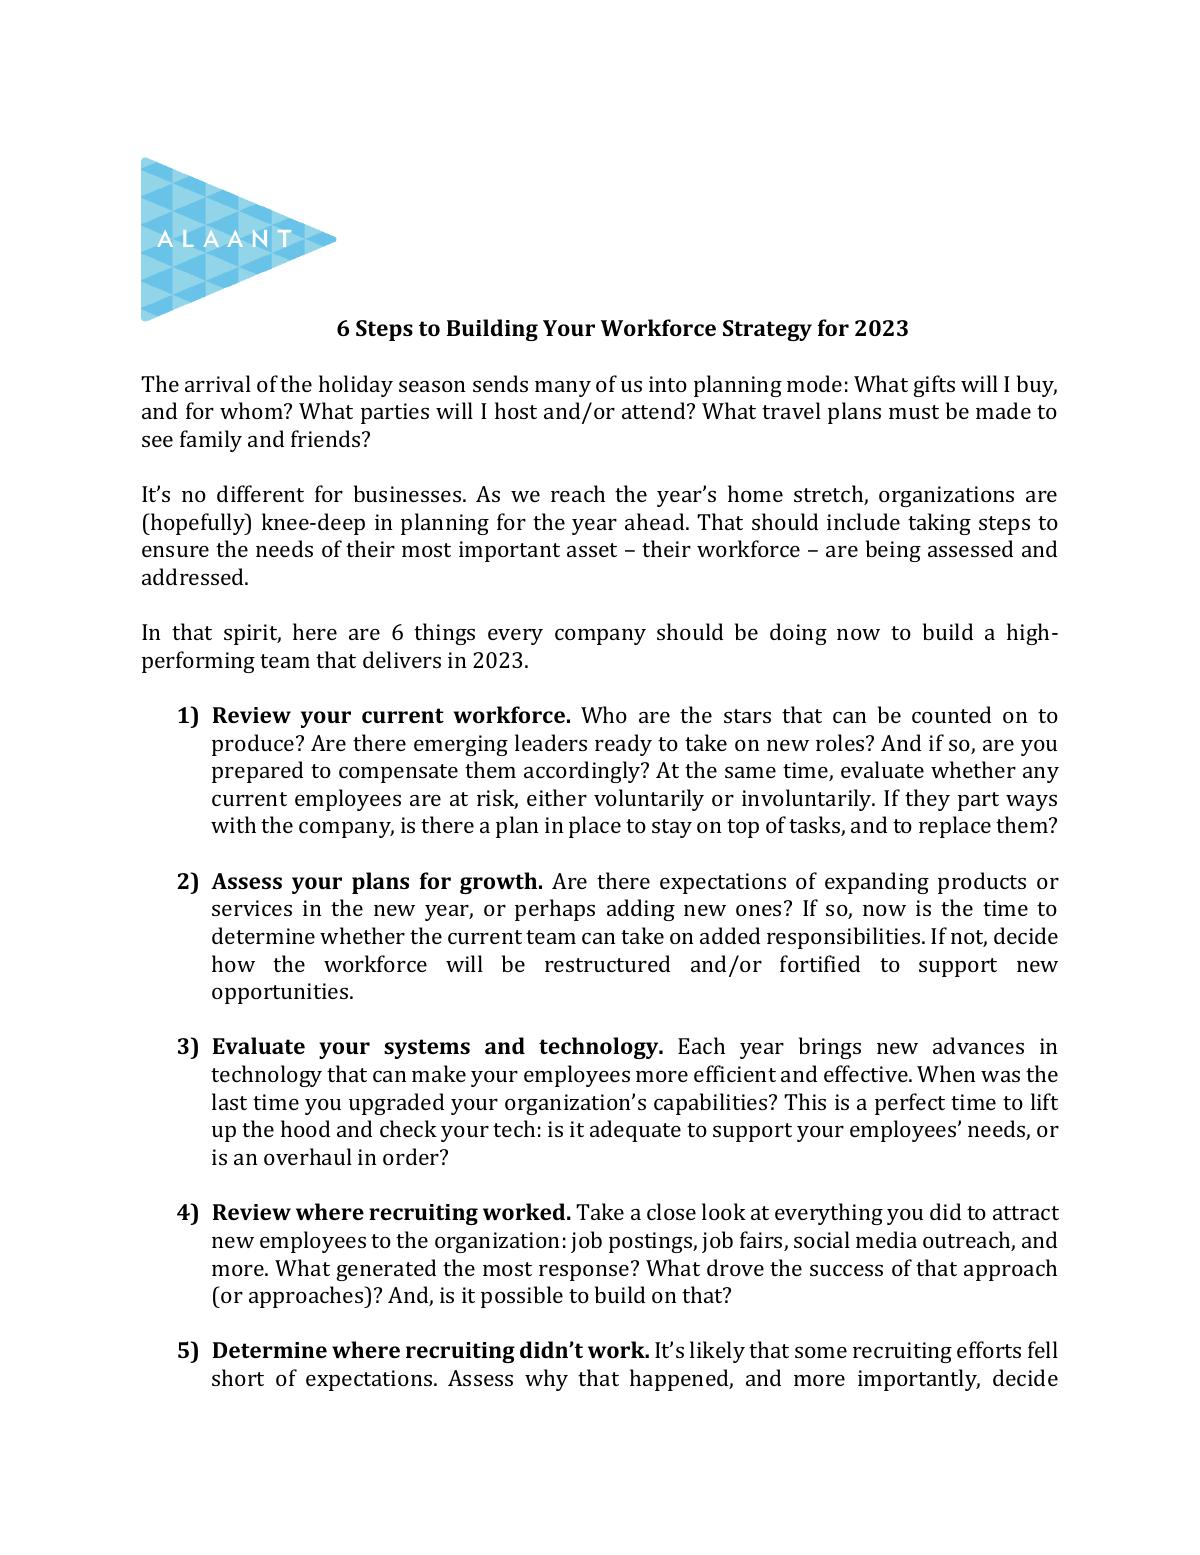 6 Steps to Building your Workforce Strategy in 2023